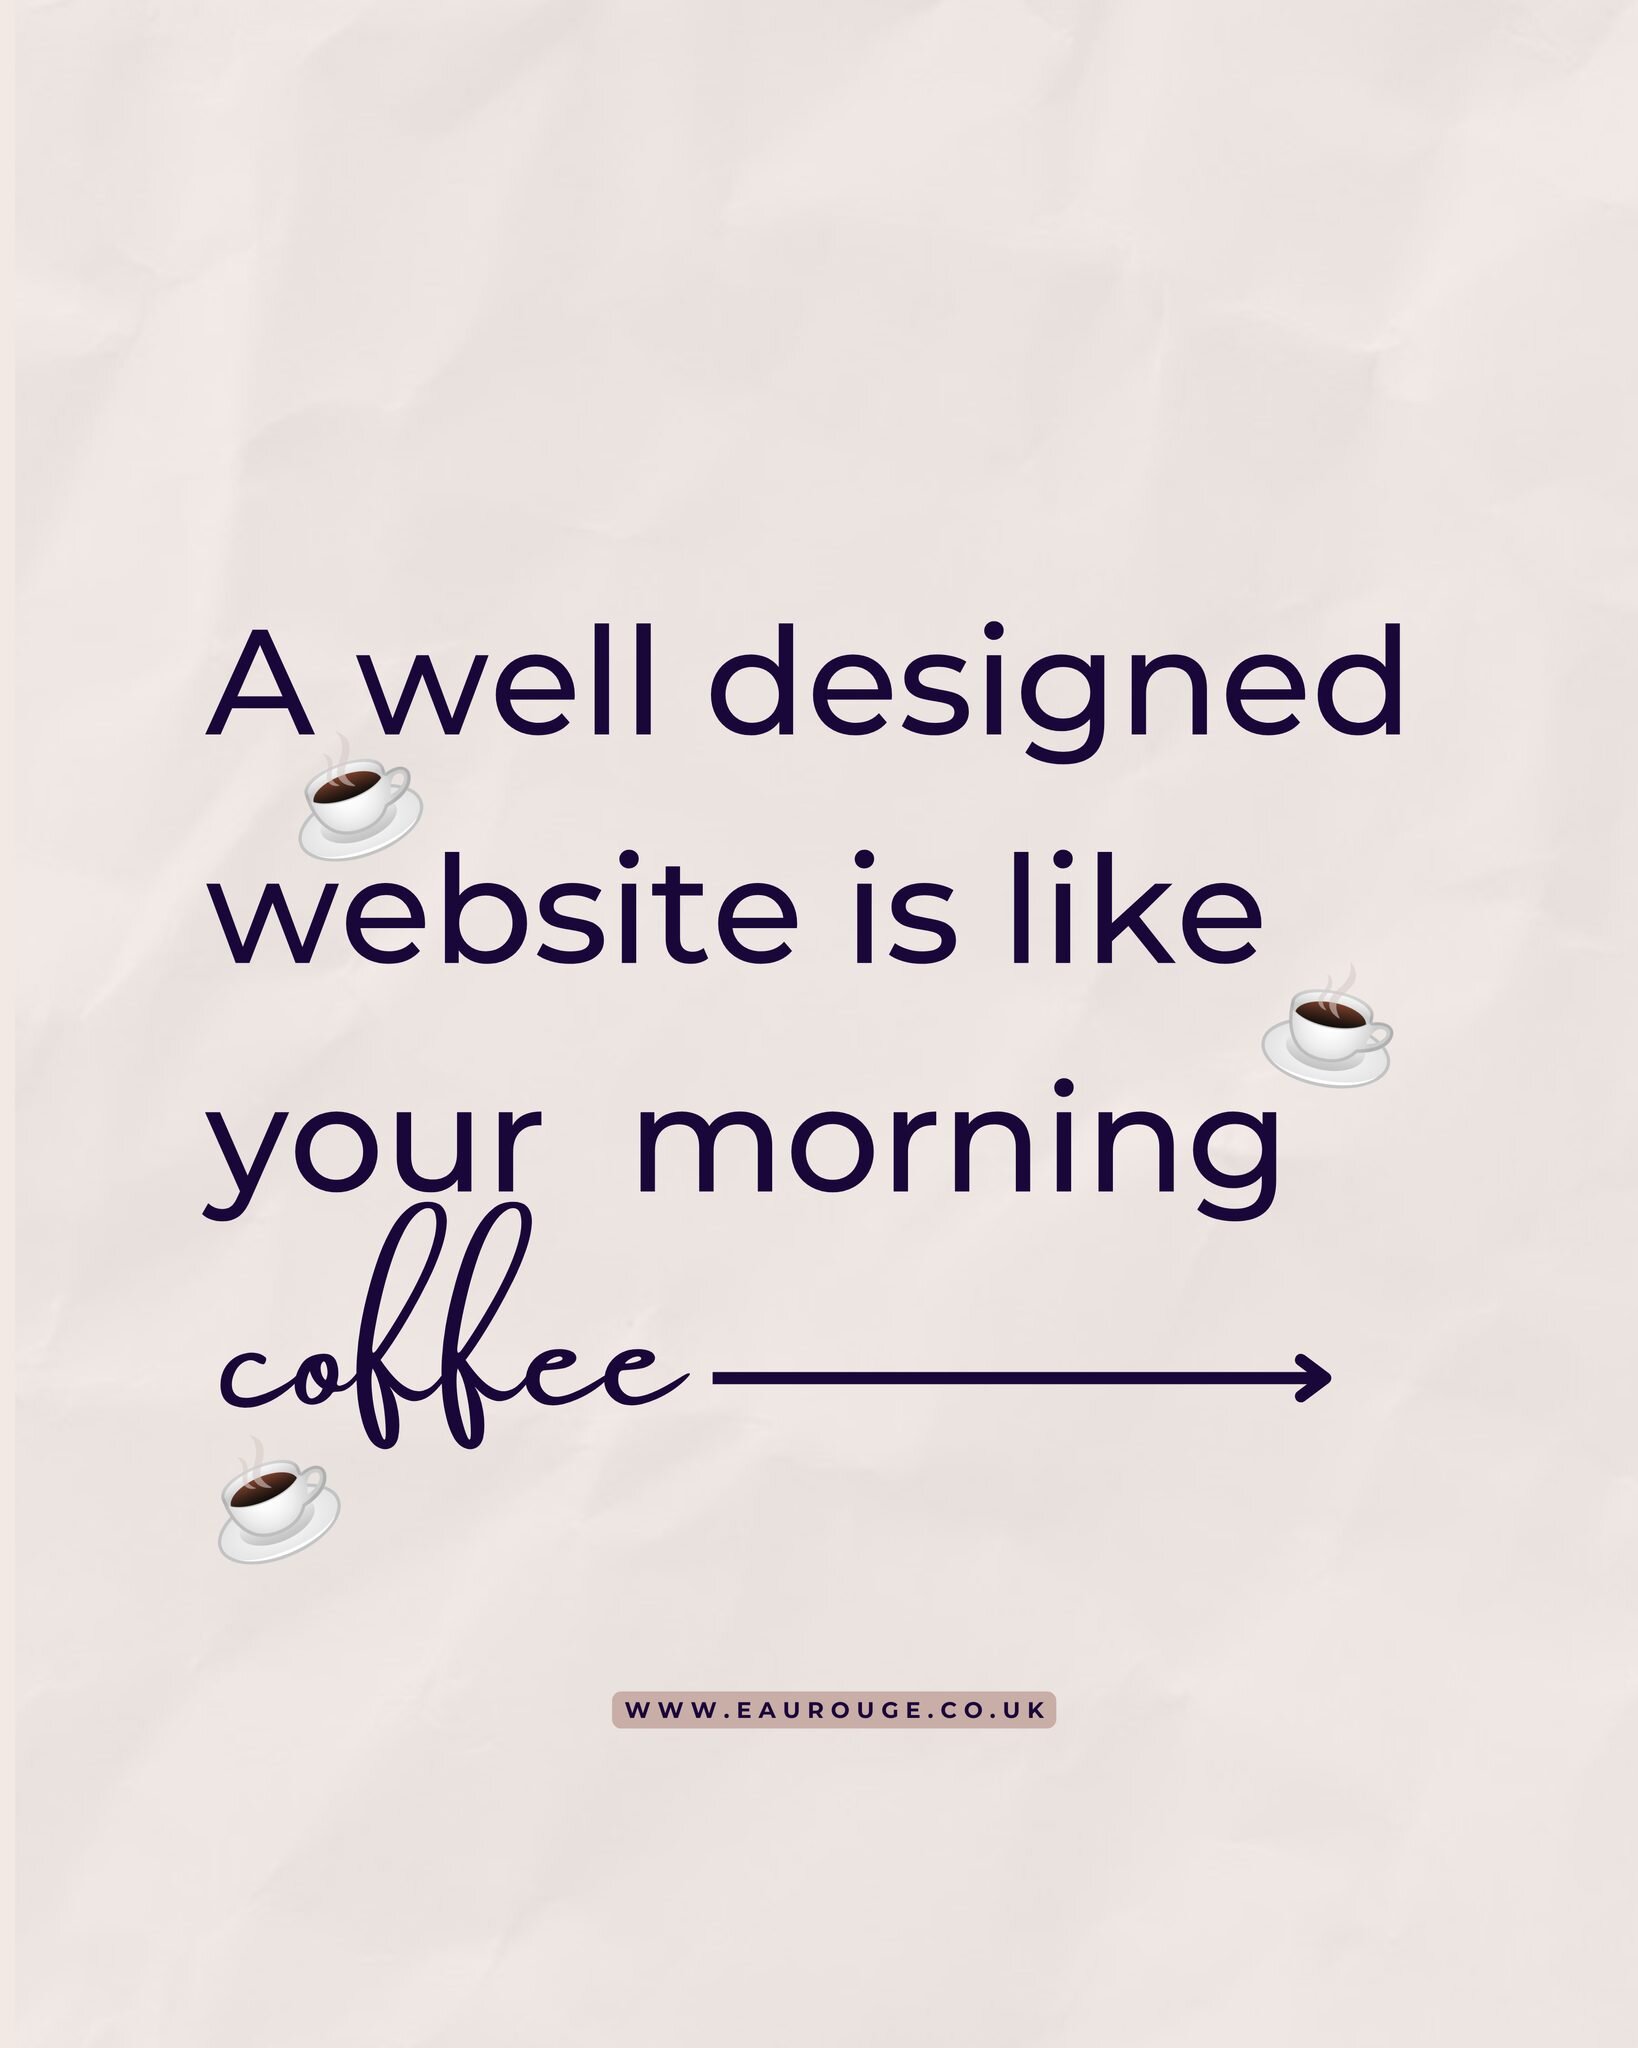 So, your morning frothy coffee is a non-negotiable, right? ☕️

And, without that dose of caffeine, you struggle to function above probably 50% capacity, am I also right? 😆

Well, your website design works EXACTLY the same. Without a carefully, strat